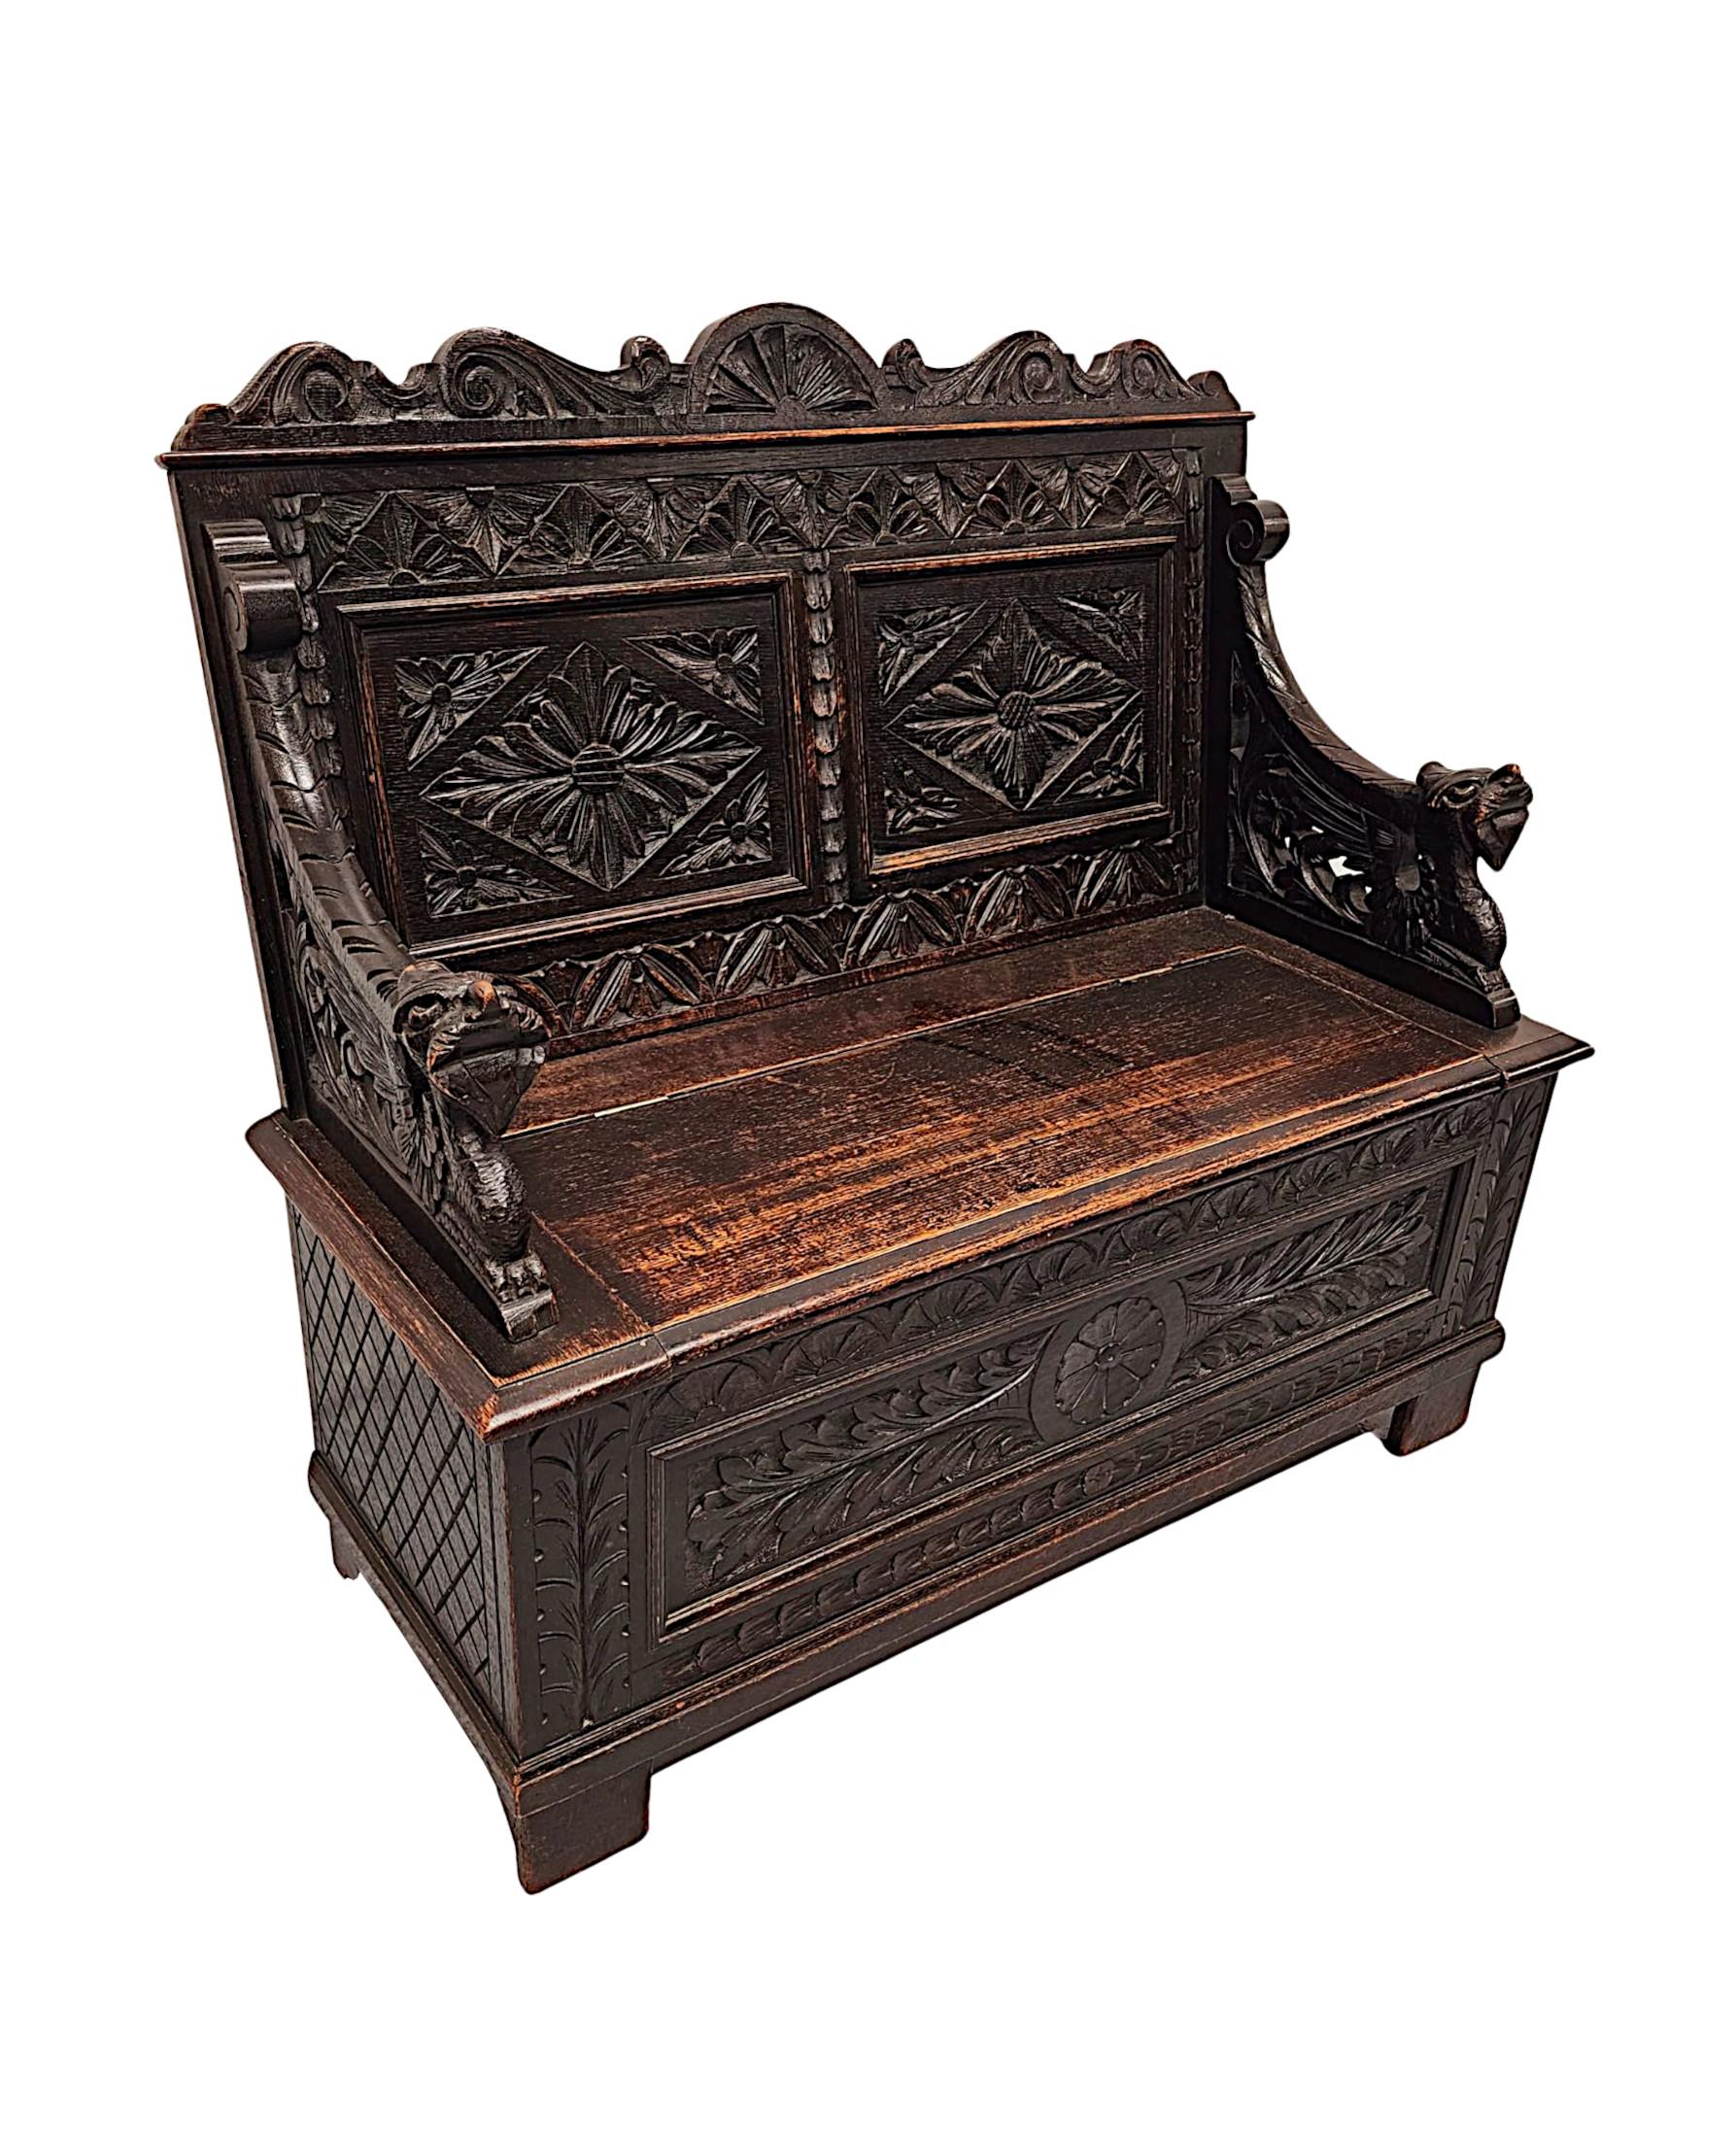 A fabulous 19th Century well figured, oak monks bench of exceptional quality, finely hand carved with rich patination, grain and profusely decorated with carved detail throughout.  The shaped and moulded twin panelled back with geometric and foliate